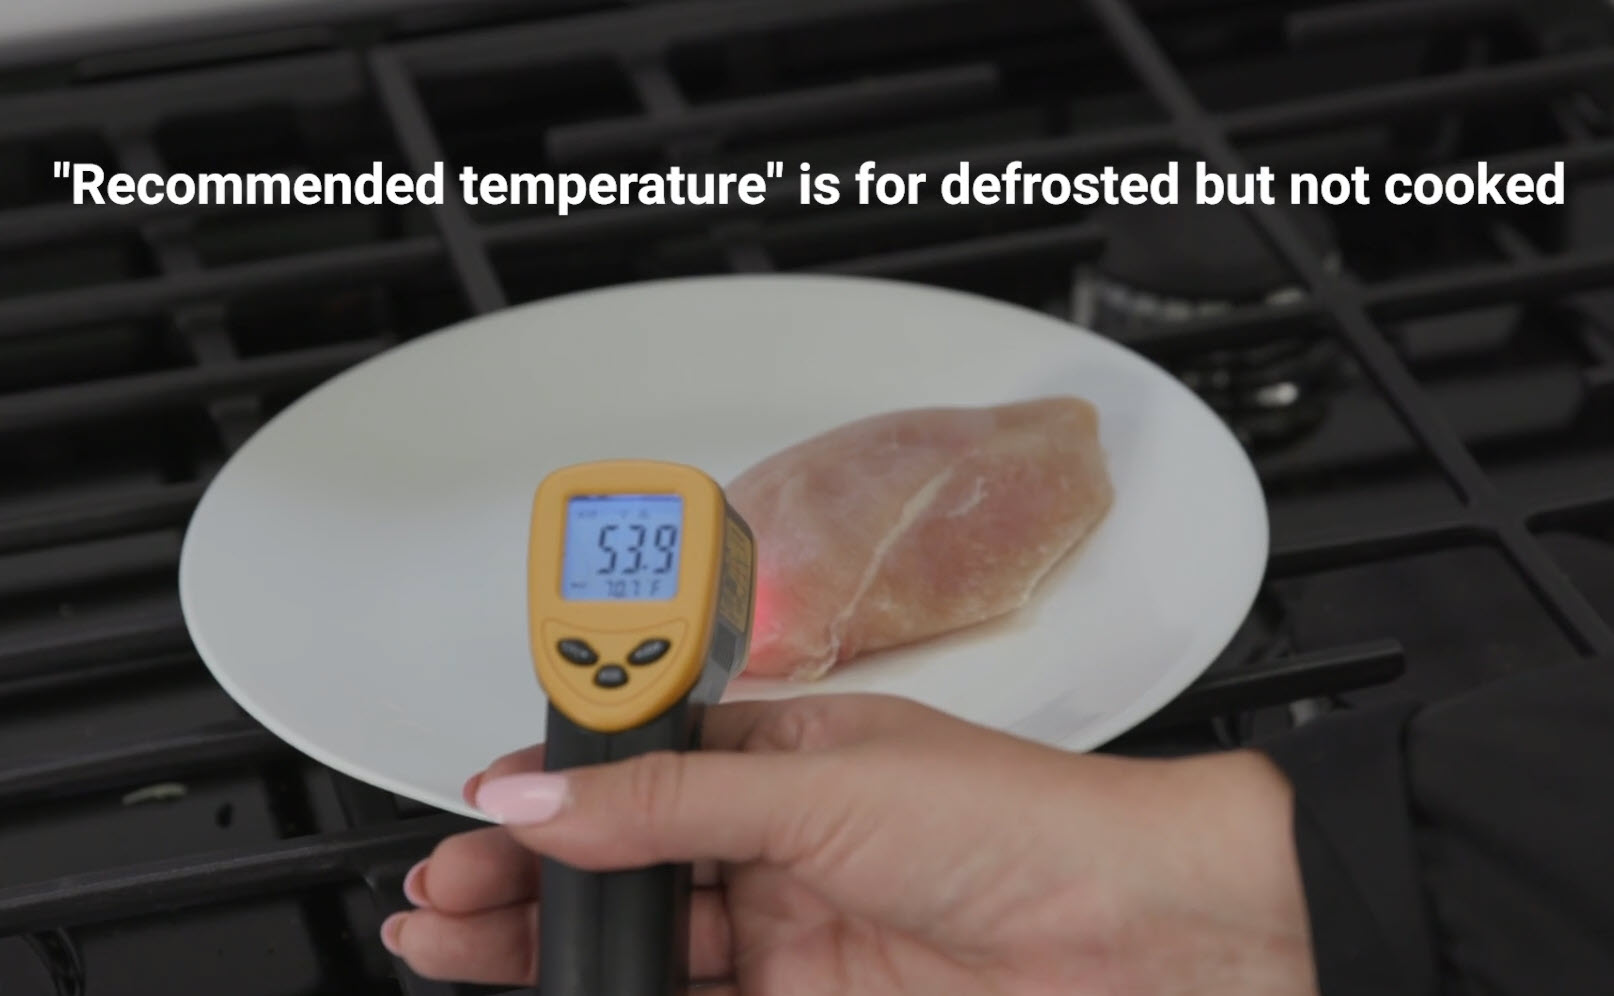 Utilize this video to demo the Auto Defrost function on the KitchenAid & Whirlpool Flush Multifunction Microwave Oven in your stores